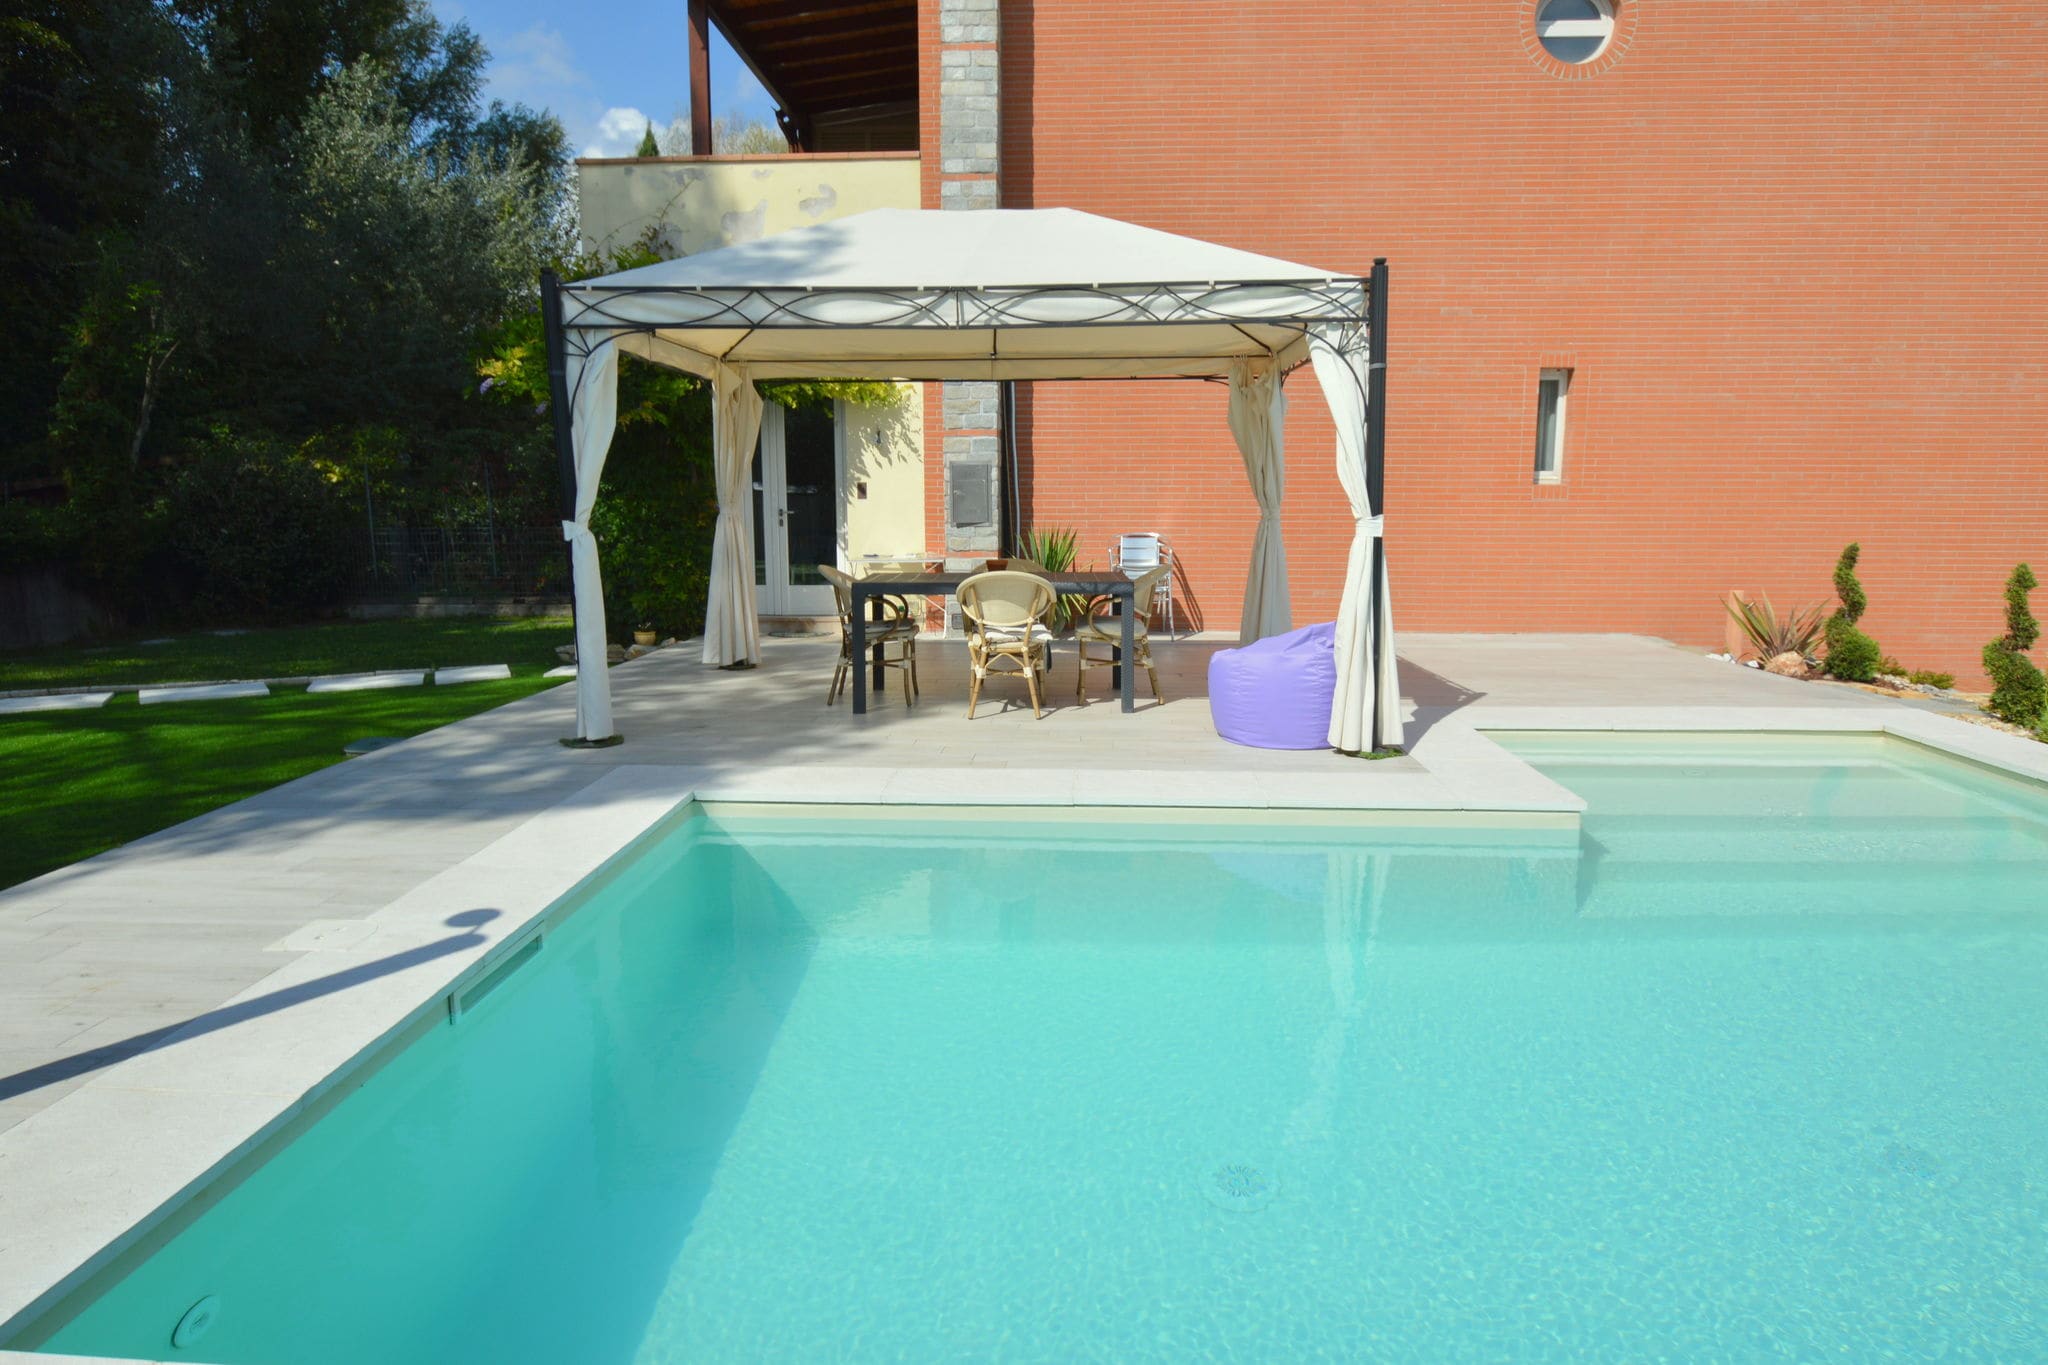 Modern villa with private pool and fenced garden 2.5 km from Lucca